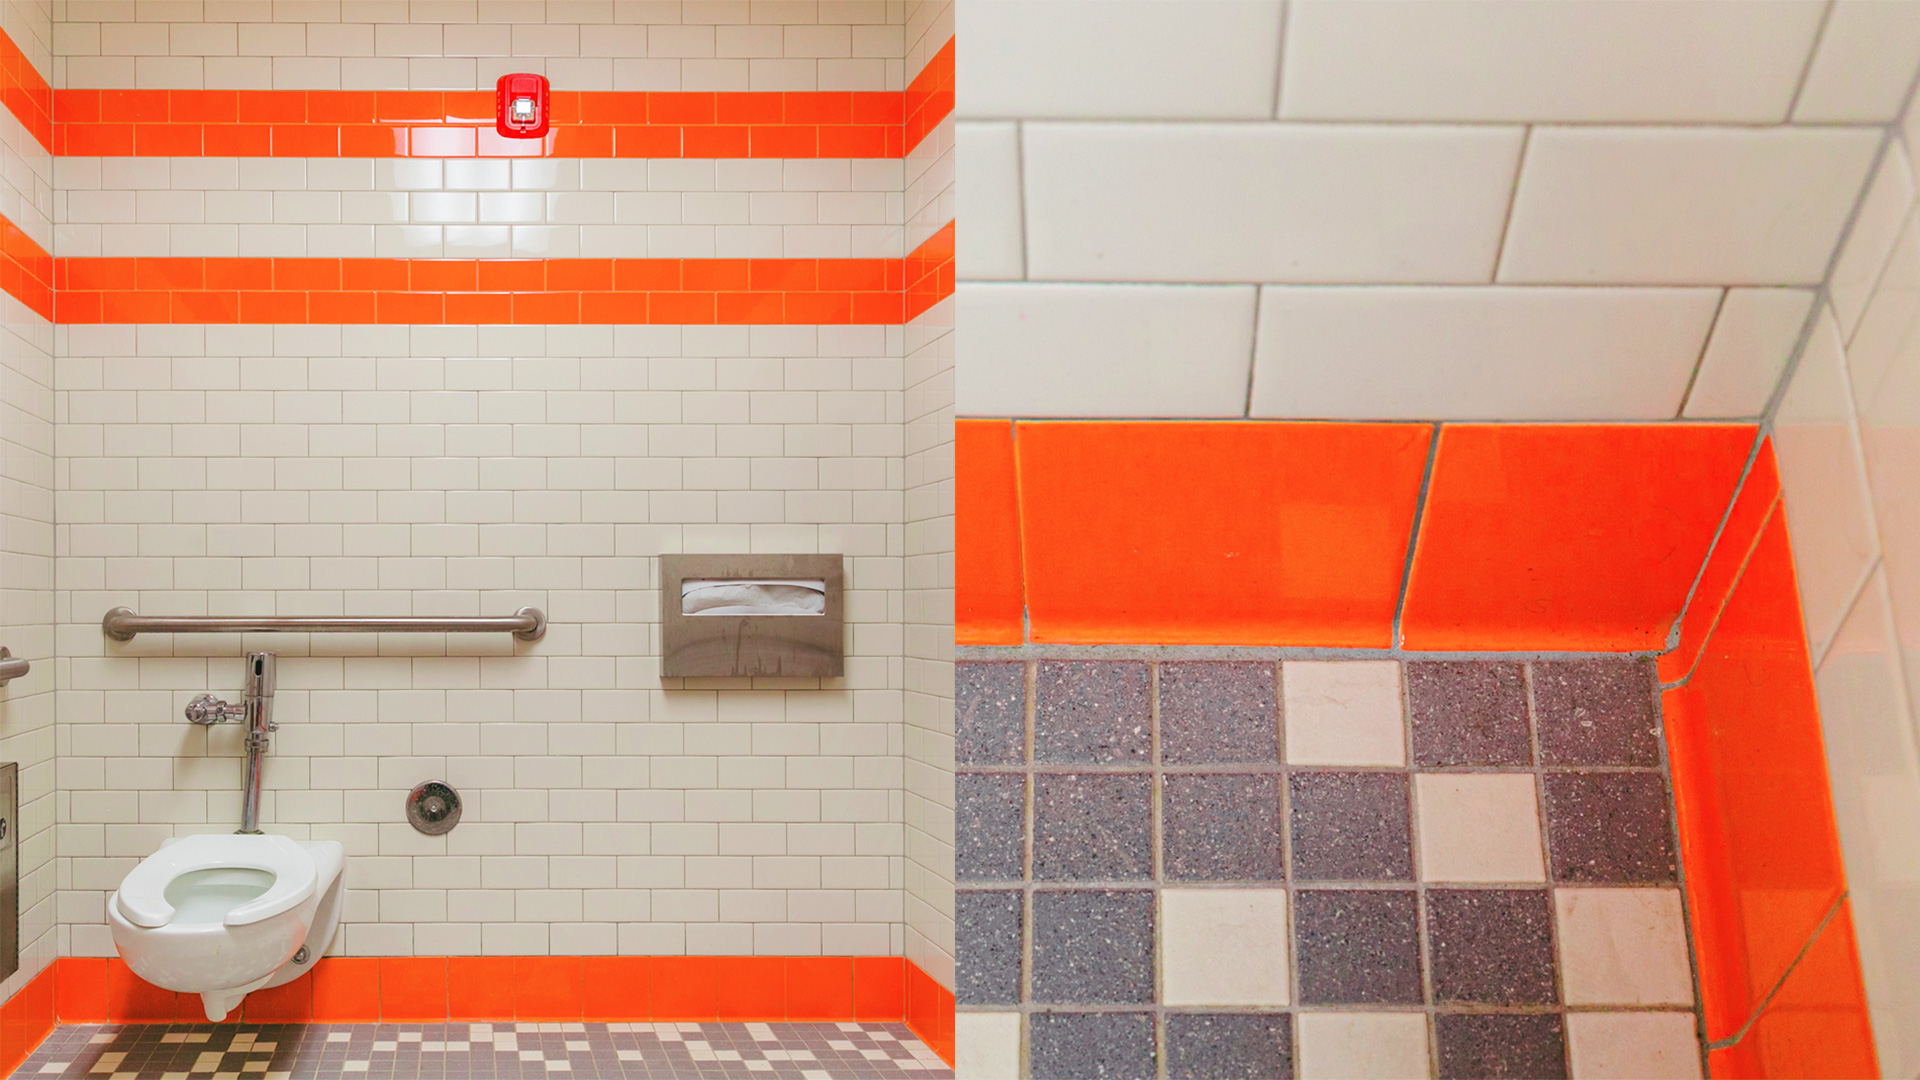 Portable restroom interior, with white and orange tiles, and gray tiles flooring.